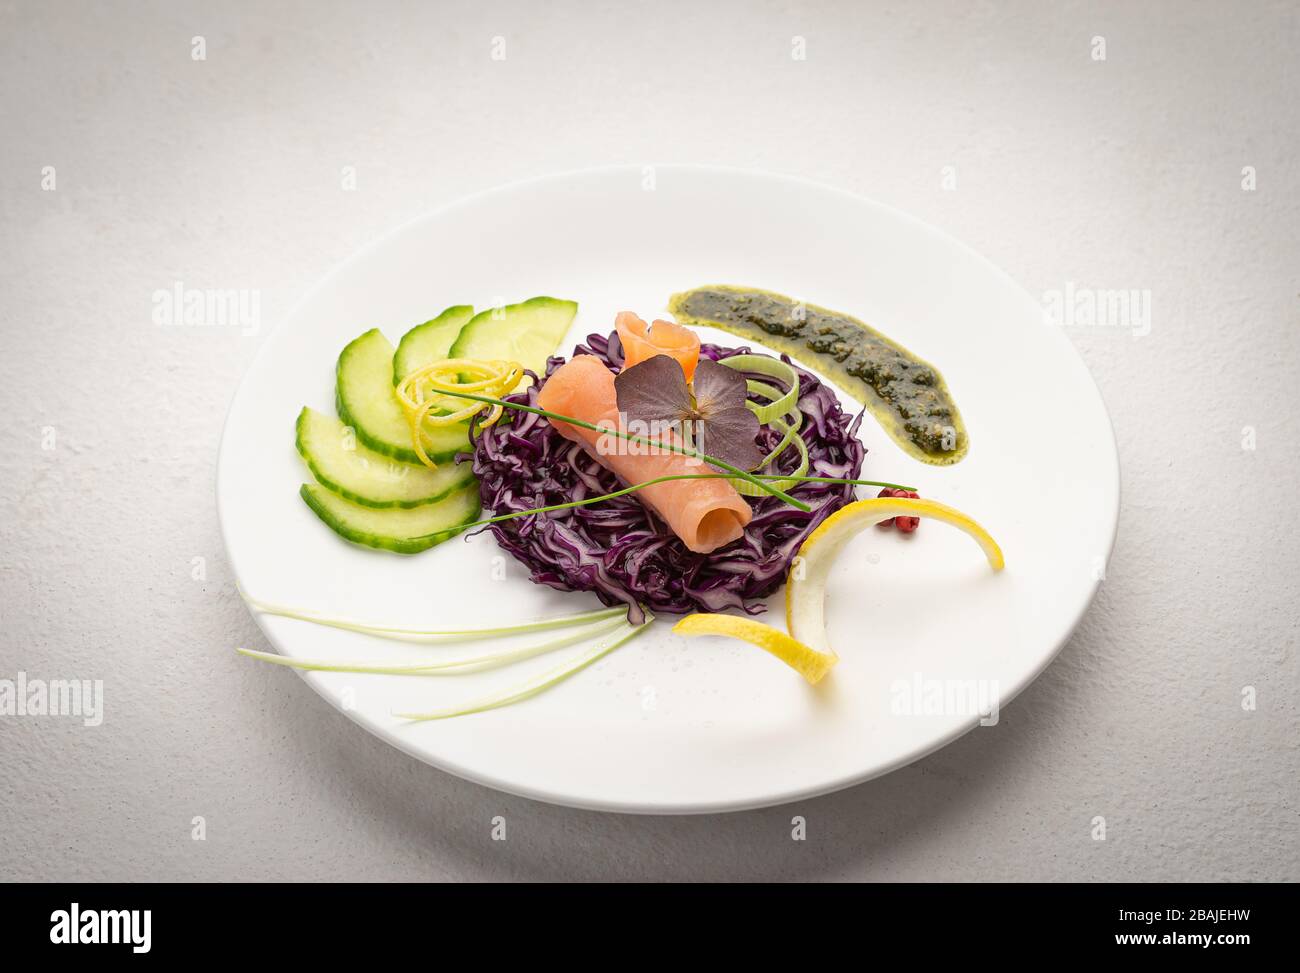 Plate of fresh smoked salmon on fresh vegetables on a white plate, with bright colors and a white background Stock Photo